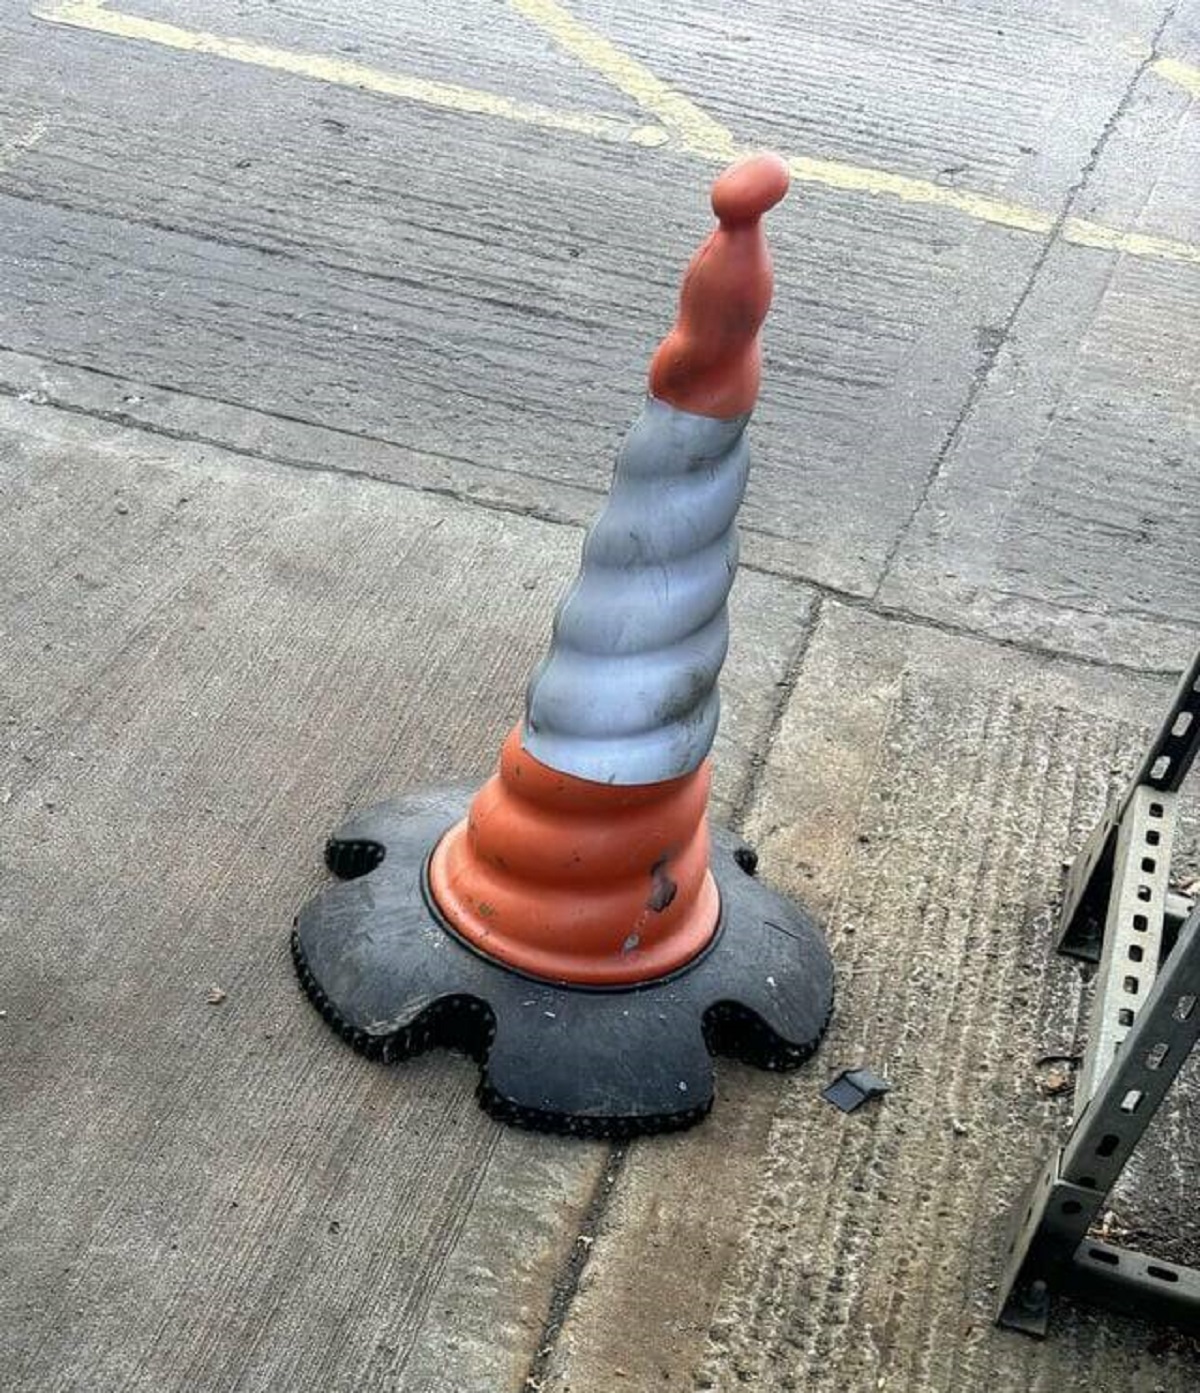 "This curly cone at my work"